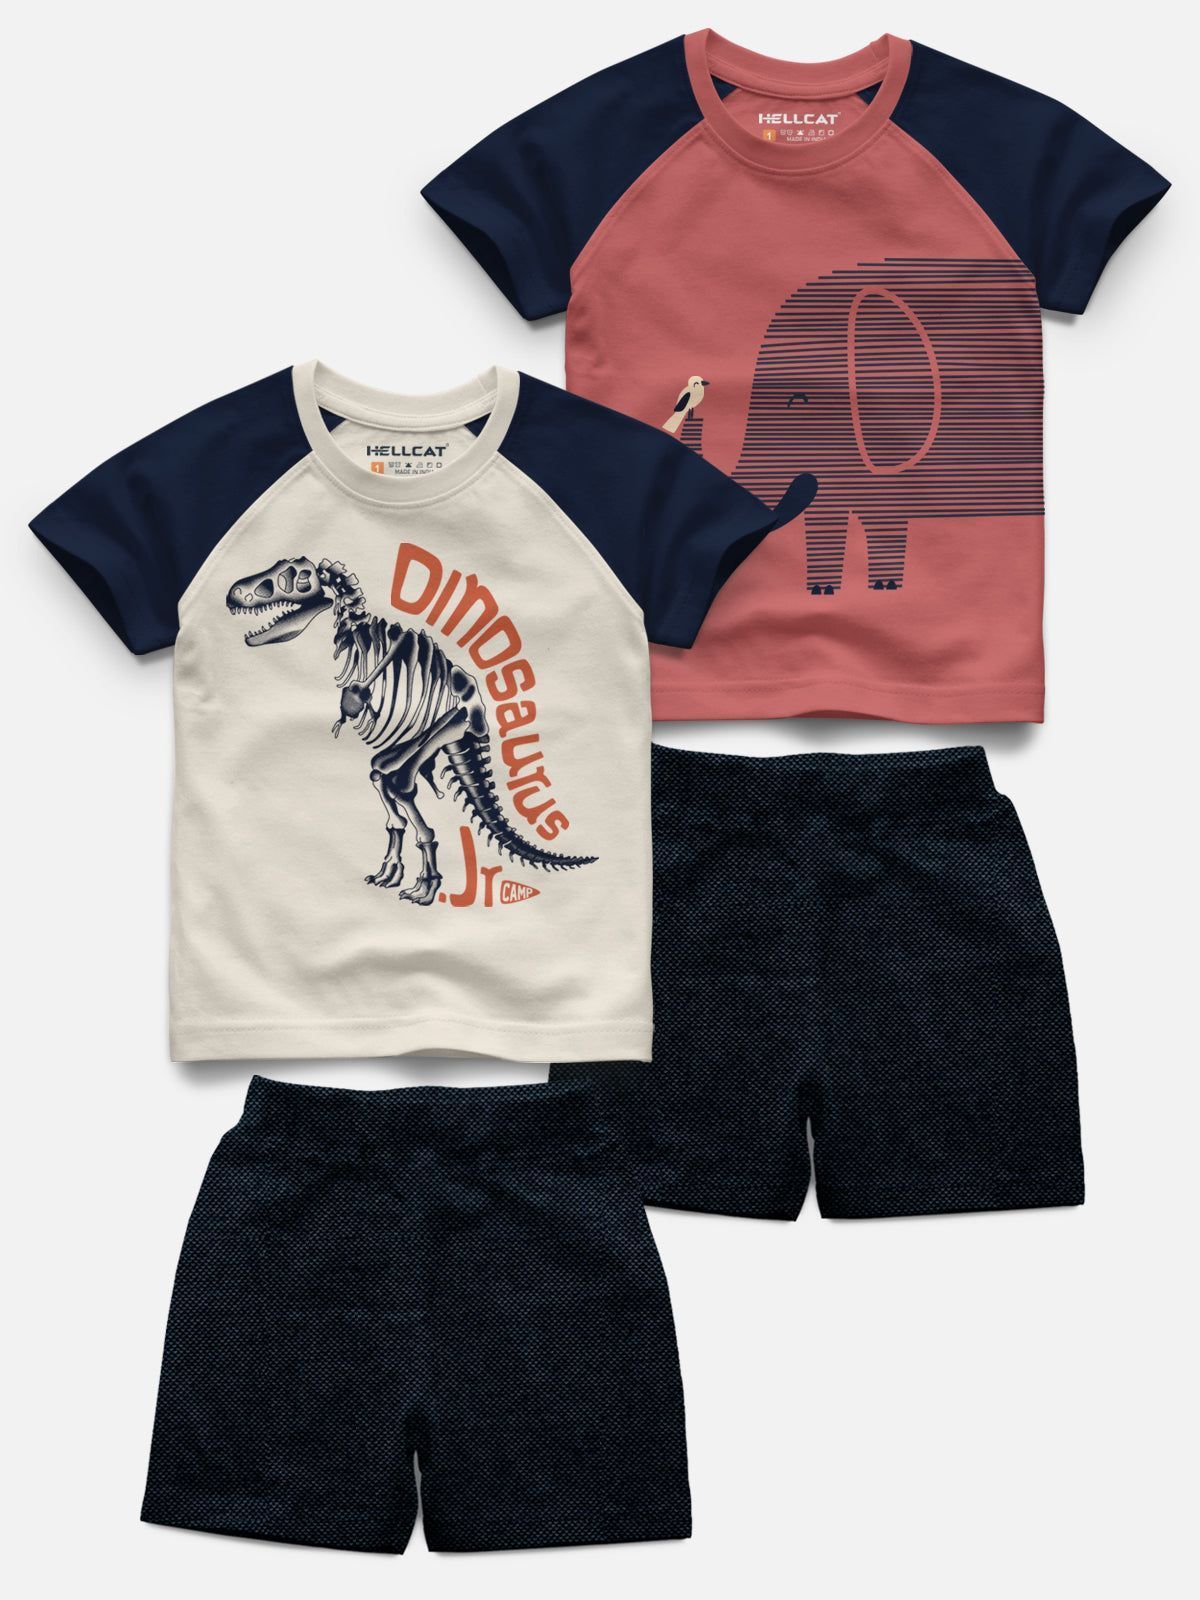 Raglan Half Sleeve Printed T-shirt with Comfy Solid Shorts for Infants & Girls - Pack of 4 (2 T-shirt & 2 Shorts)